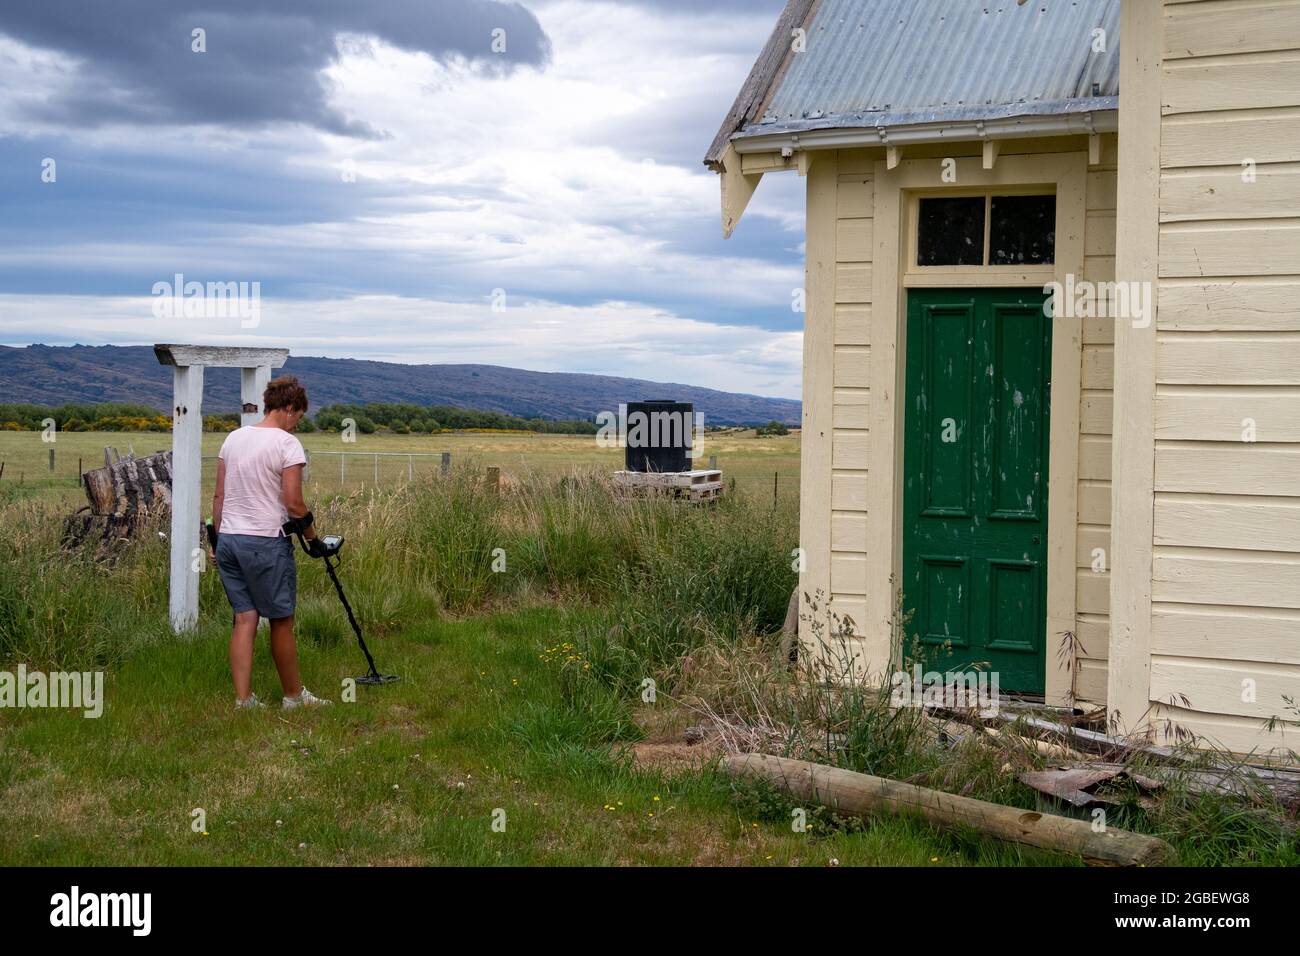 A women looks for old coins using a metal detector around an old deserted building Stock Photo